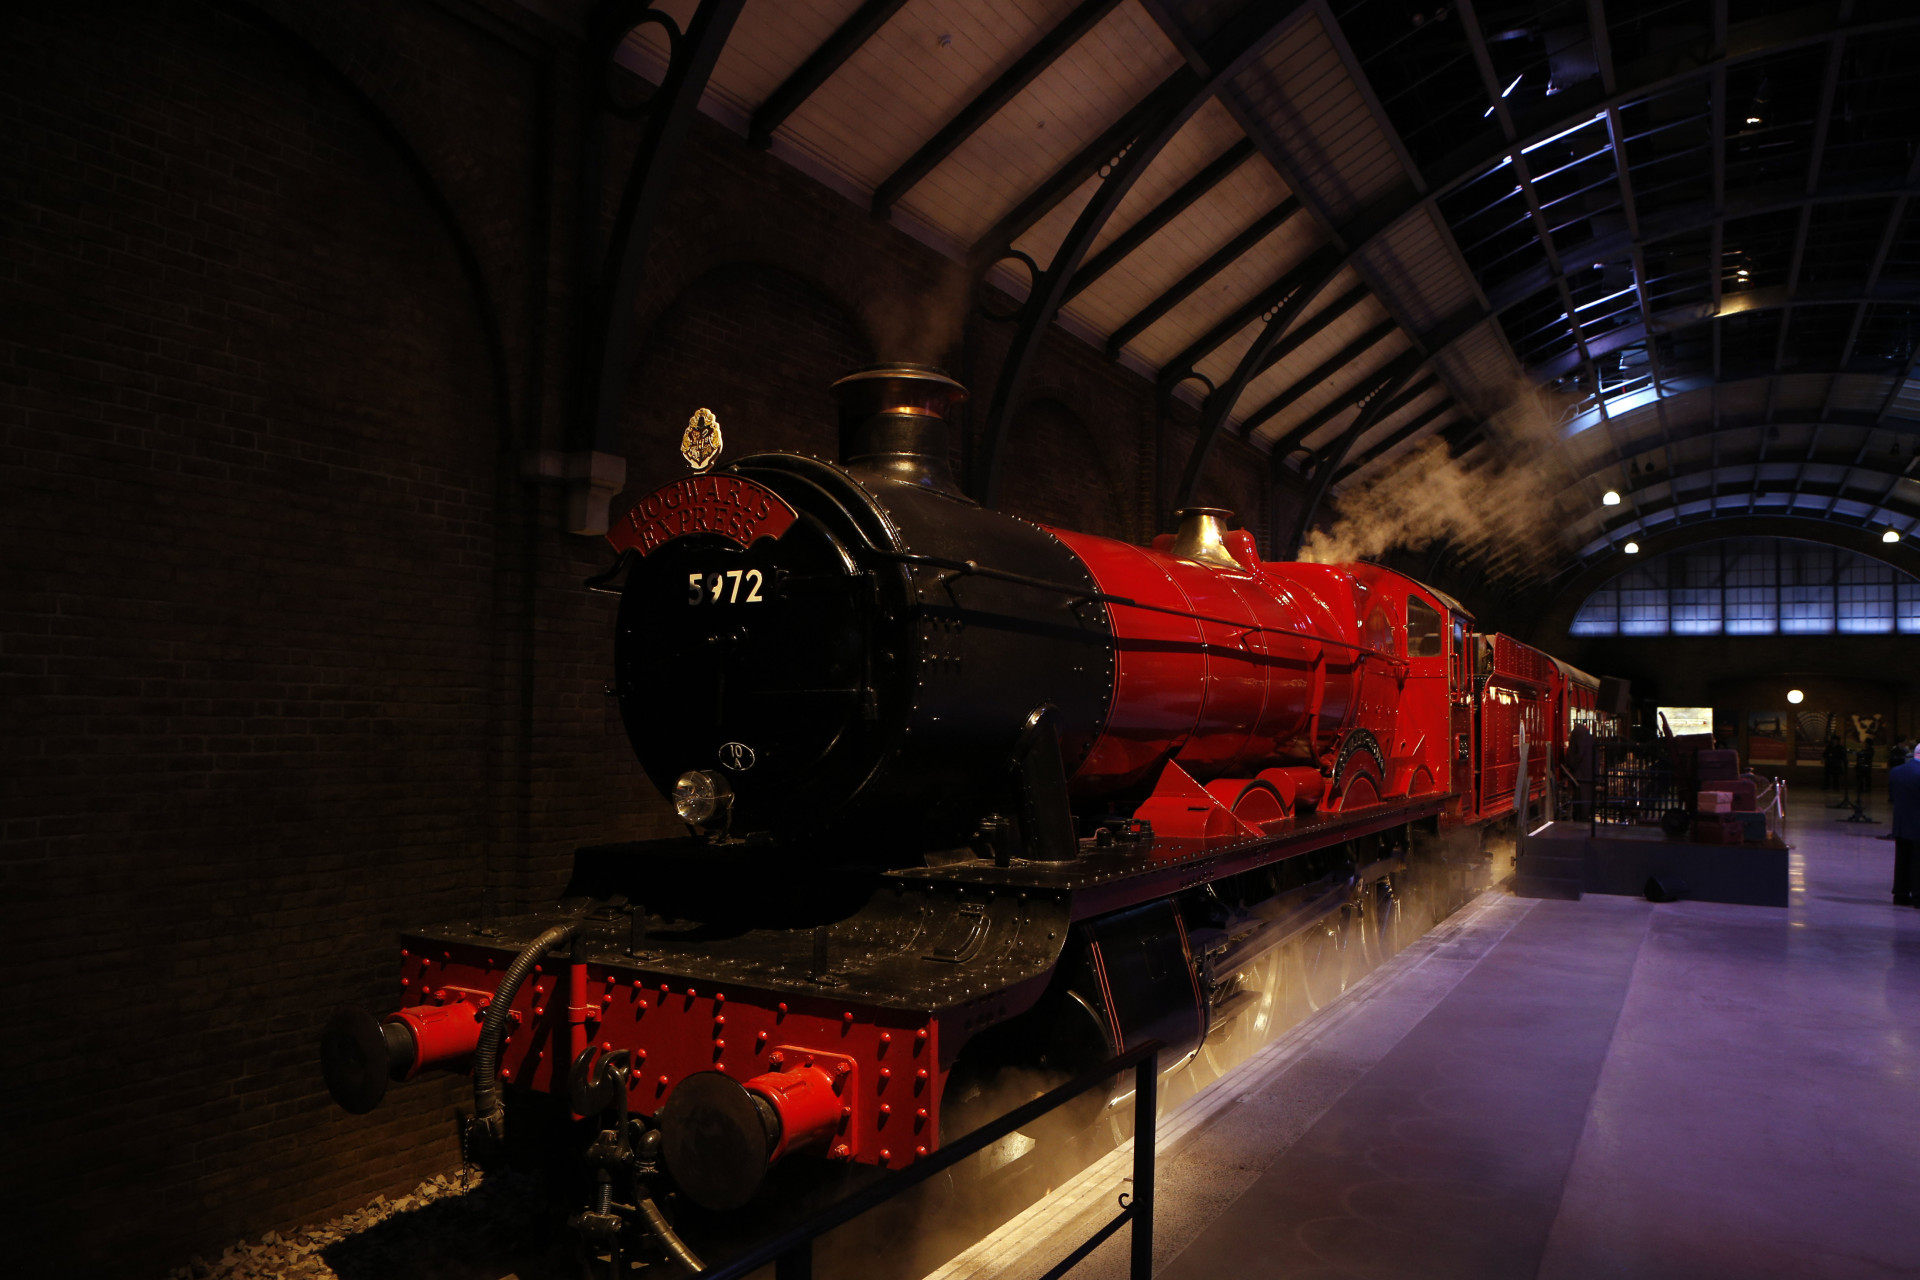 You can now take a ride on the legendary Hogwarts Express at the Universal Studios theme park in Orlando.<p>You may also like:<a href="https://www.starsinsider.com/n/332920?utm_source=msn.com&utm_medium=display&utm_campaign=referral_description&utm_content=386265v16en-us"> Lady Gaga and Bradley Cooper’s cutest moments </a></p>